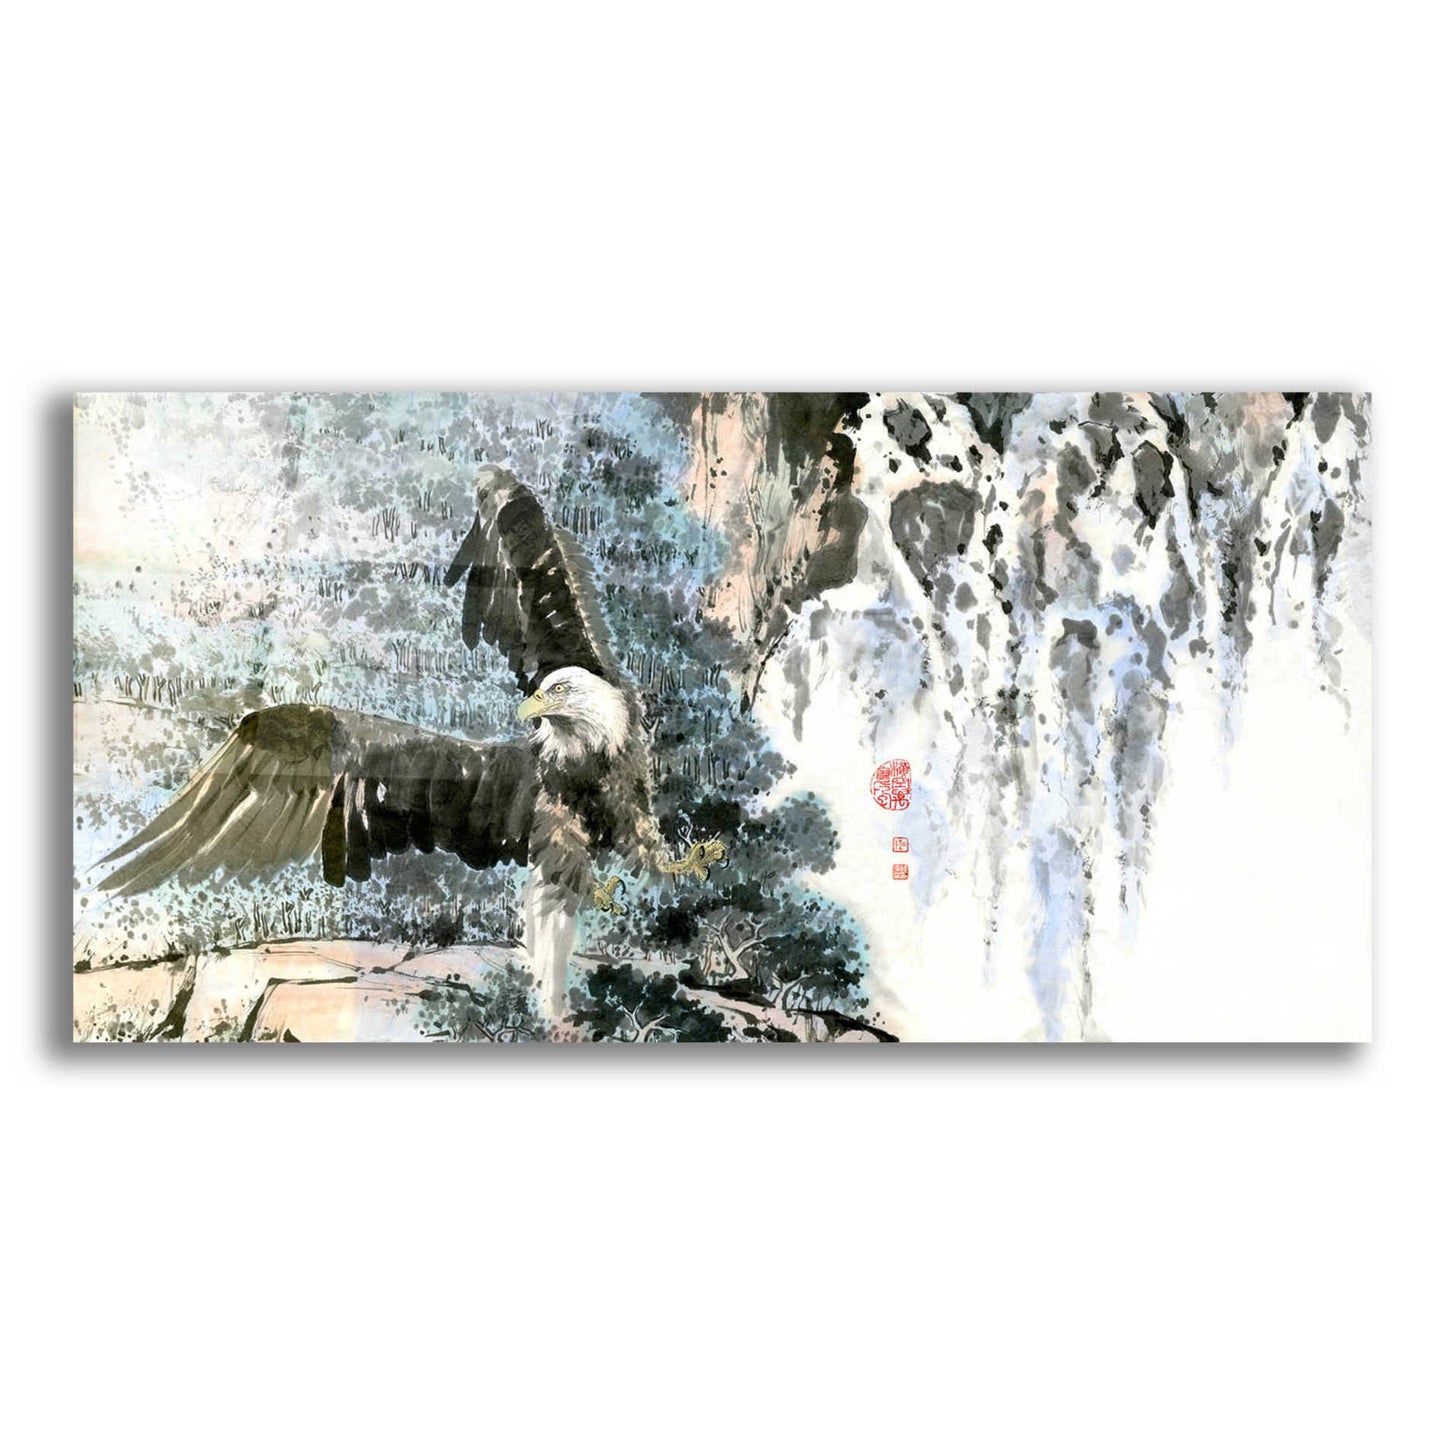 Epic Art 'Bald Eagle Over Cascading Waterfalls' by River Han, Acrylic Glass Wall Art,24x12